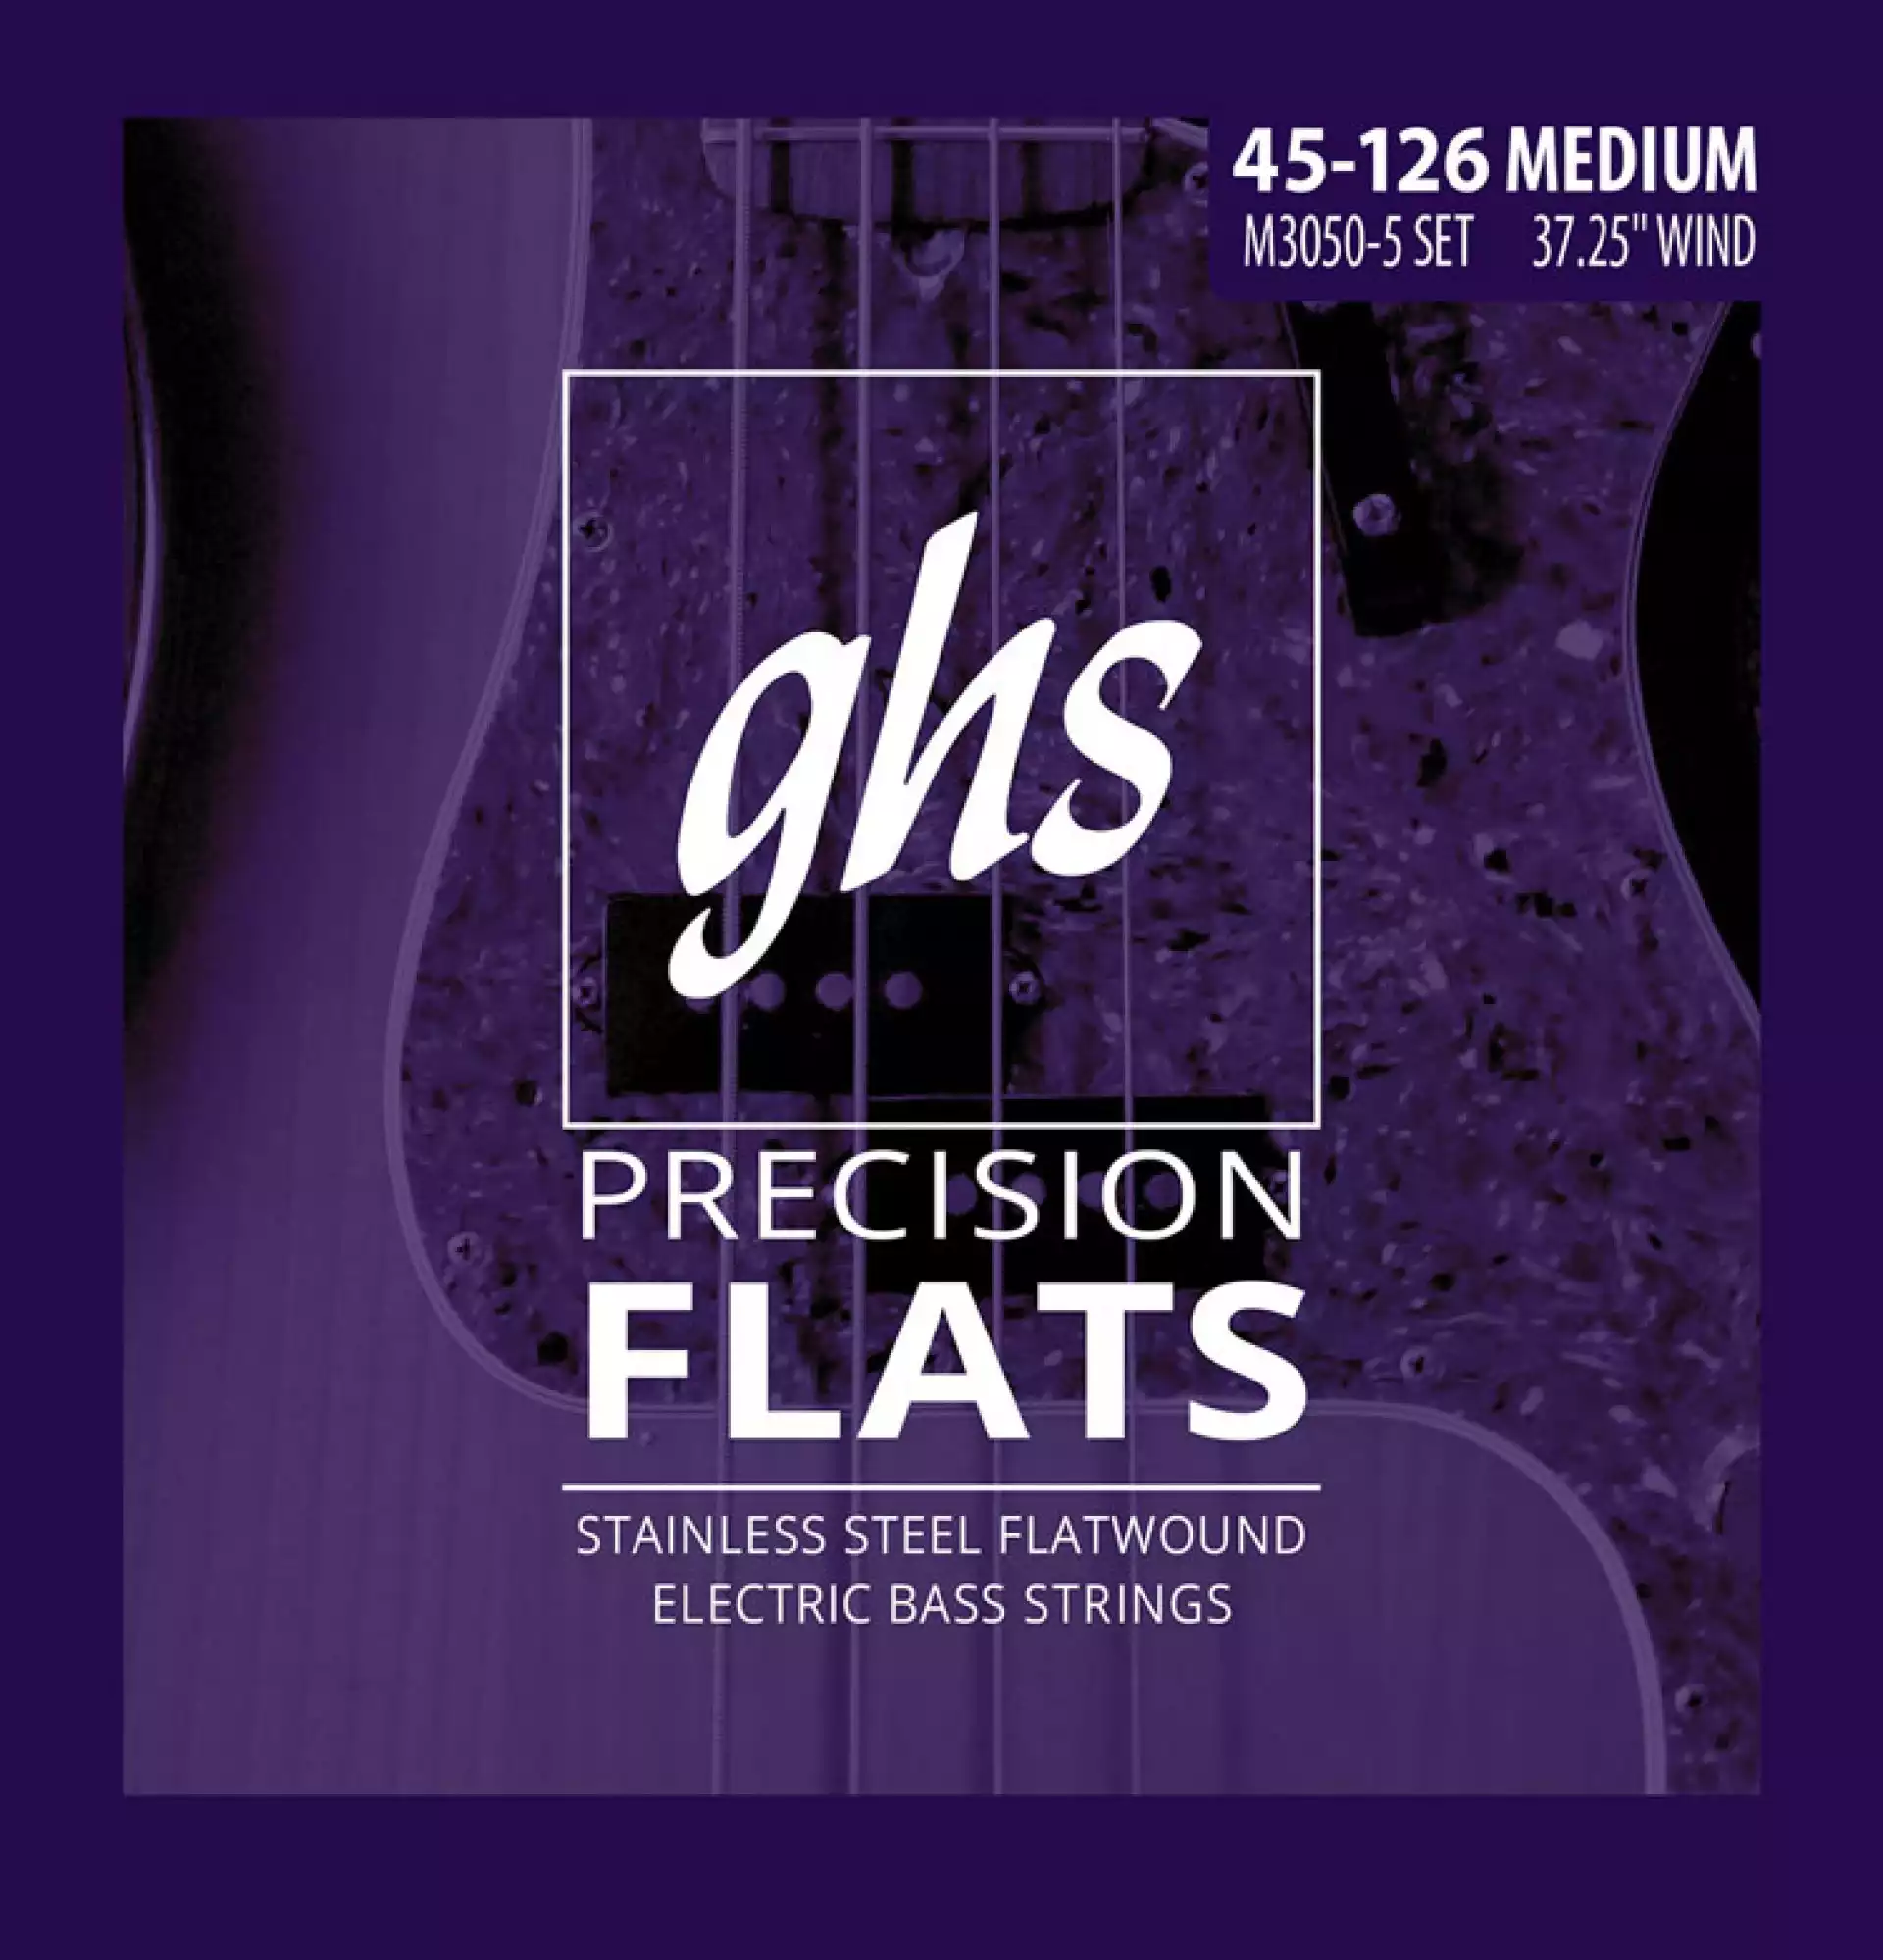 GHS M3050-5 Precision Flats Flatwound Bass Strings Long Scale - 5-String 45-126 Medium